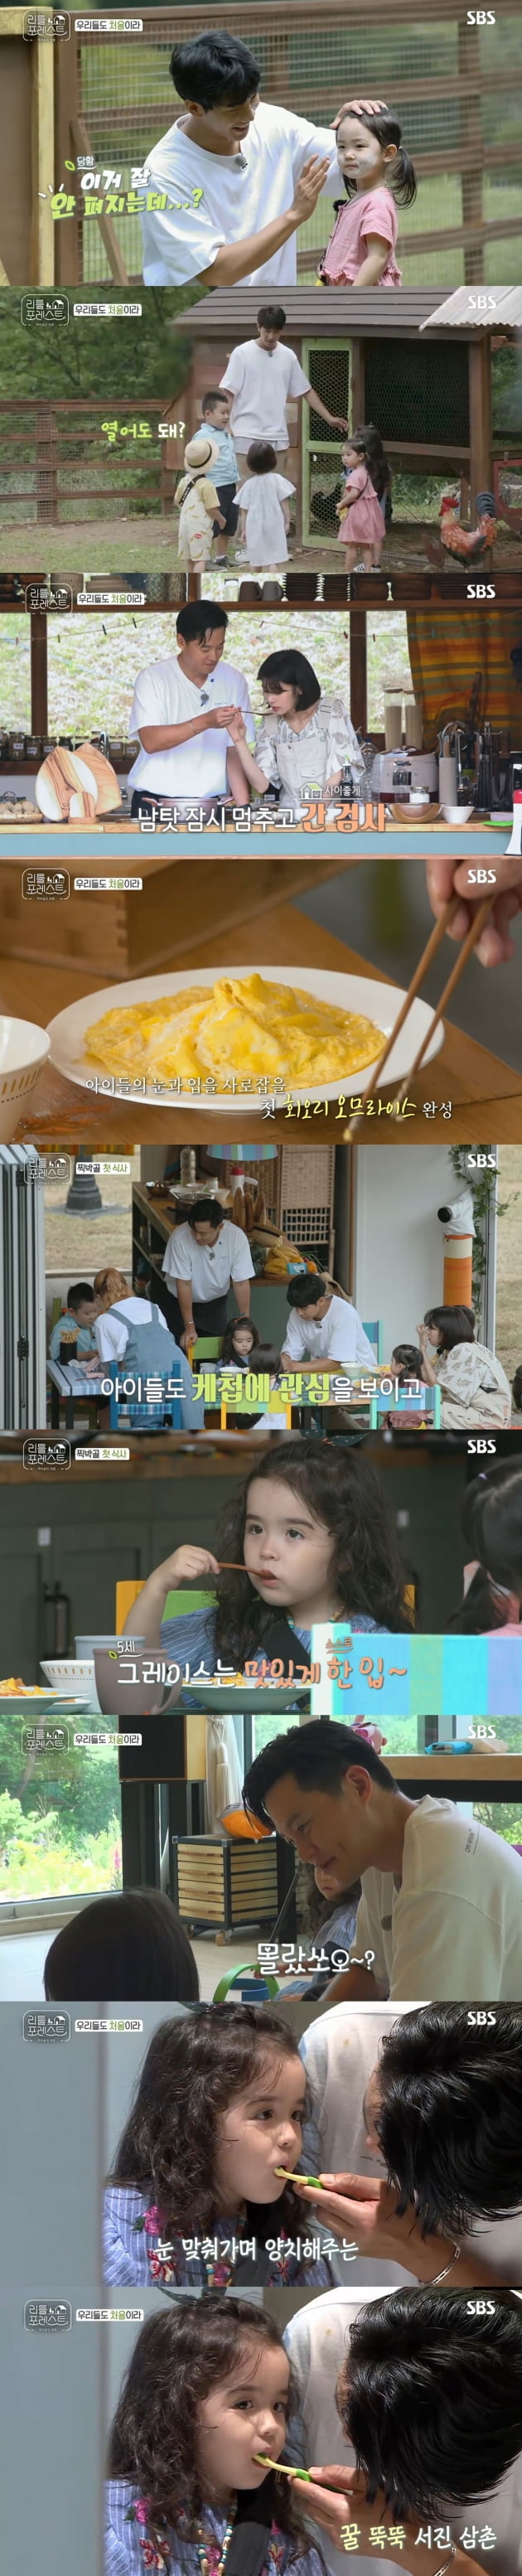 The ratings of SBS entertainment Little Forest dropped slightly.According to Nielsen Korea, the ratings agency Little Forest, which was aired on the 13th, recorded 3.5% and 5.0% ratings, respectively, in the first and second parts.This is down from the previous broadcast ratings of 5.15% and 6.8%, but the highest audience rating per minute rose to 7.7%, drawing attention to the ups and downs of broadcasting ratings in the future.On this day, the first meeting of five children and four members of Lee Seo-jin, Lee Seung-gi, Park Na-rae and Jung So-min was revealed.Earlier, all five children who had raised expectations by entering the Ttakbangol, a caring house of Little Forest, appeared in the first broadcast.Lee Seung-gi and Park Na-rae led the children to an animal farm in the tamper.At the animal farm, where rabbits, chickens, and chicks are located, children, with the help of The Uncle, took out the eggs that the chicken had produced and fed them directly to the rabbits and became friends with the animals.But Park Na-rae, who has chicken phobias, was seen as stuck away from the animal farm without even entering it.Lee Seung-gis true poisonous child care has begun.Park Na-rae laughed as he stood outside the fence and cheered, watching Lee Seung-gi struggling with children alone in an animal farm.Lee Seo-jin and Jung So-min were busy preparing their first meal for children.The lunch menu of the day was Hwiry Omrais, a menu that Lee Seo-jin learned in advance.Lee Seo-jin looked meticulous, not forgetting what mothers had asked for, but chopping and chopping up ingredients for children.In addition, he showed his aspect as a make-up main chef with a child cooking certificate by making egg whirls skillfully.After lunch preparation, the first meal with the children was a difficult mission for the novice carers.The members sweated to feed the children who were not accustomed to eating alone during lunch.Even after feeding the children, they could not eat properly because they were taking care of the children.In a completely different reality from the ideal that I had dreamed of, the members began to become less and less talkative.But there was a ray of light in the child-rearing of war. It was the childrens catastrophic cuteness.The members of The Uncle, the children who are looking for their aunts, did not lose their laughter even though they were tired.Lee Seo-jins sweetness toward children attracted attention on this day.Lee Seo-jin took off his feet in a cute chorus of Chikachika of the children who finished their meals and became a The delicate brush of her teeth at eye level in Brooke gave viewers a heartfelt look.The scene, in which Lee Seo-jins affection exploded, recorded the highest audience rating of 7.7% per minute, accounting for the best one minute.Meanwhile, the third Little Forest, which will show the adaptation of Lee Seo-jin, Lee Seung-gi, Park Na-rae and Jung So-min, will be broadcast at 10 pm on Monday, the 19th.Little Forest average audience rating slightly lower Cheeka Fairy Seojin The Uncle, up 7.7% per minute